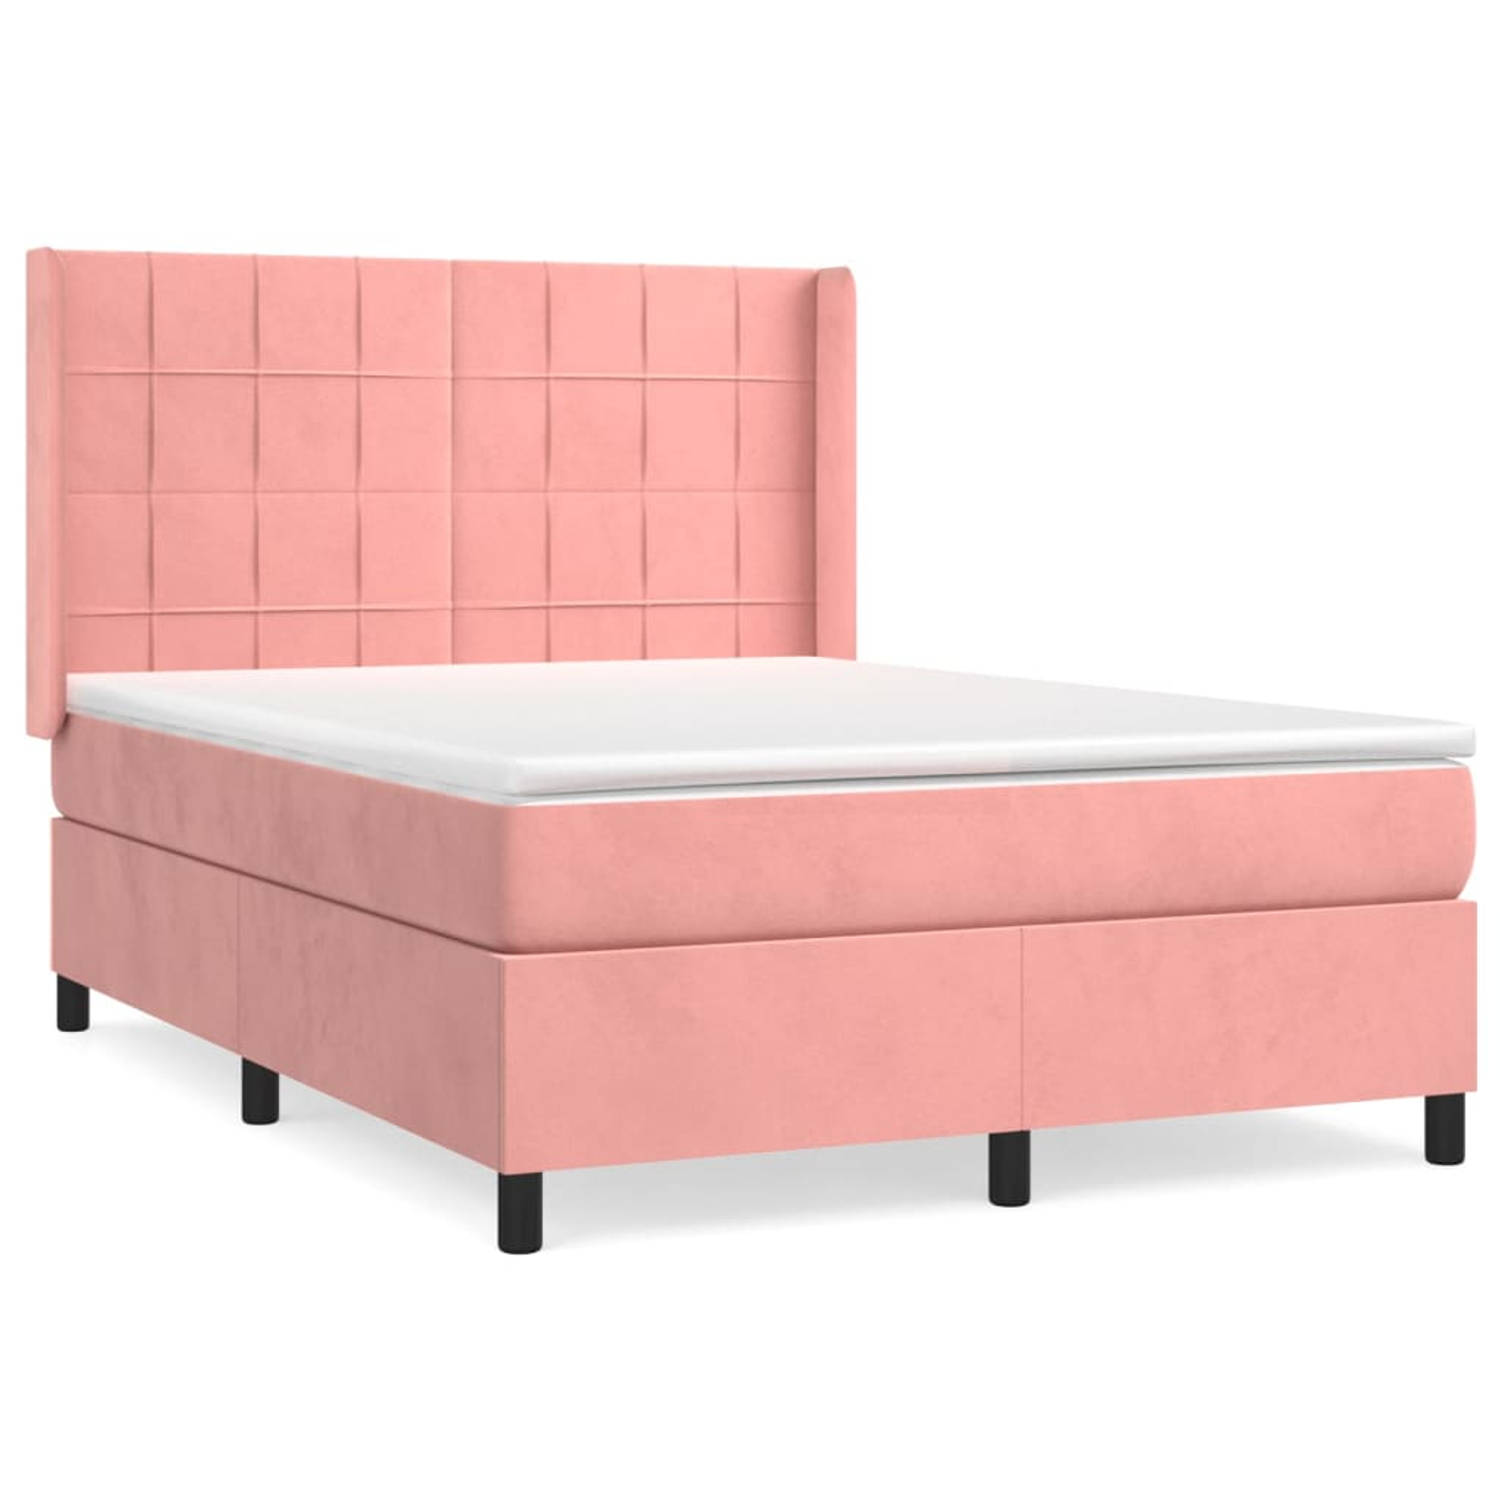 The Living Store Boxspringbed Roze - fluweel - 203 x 147 x 118/128 cm - Pocketvering